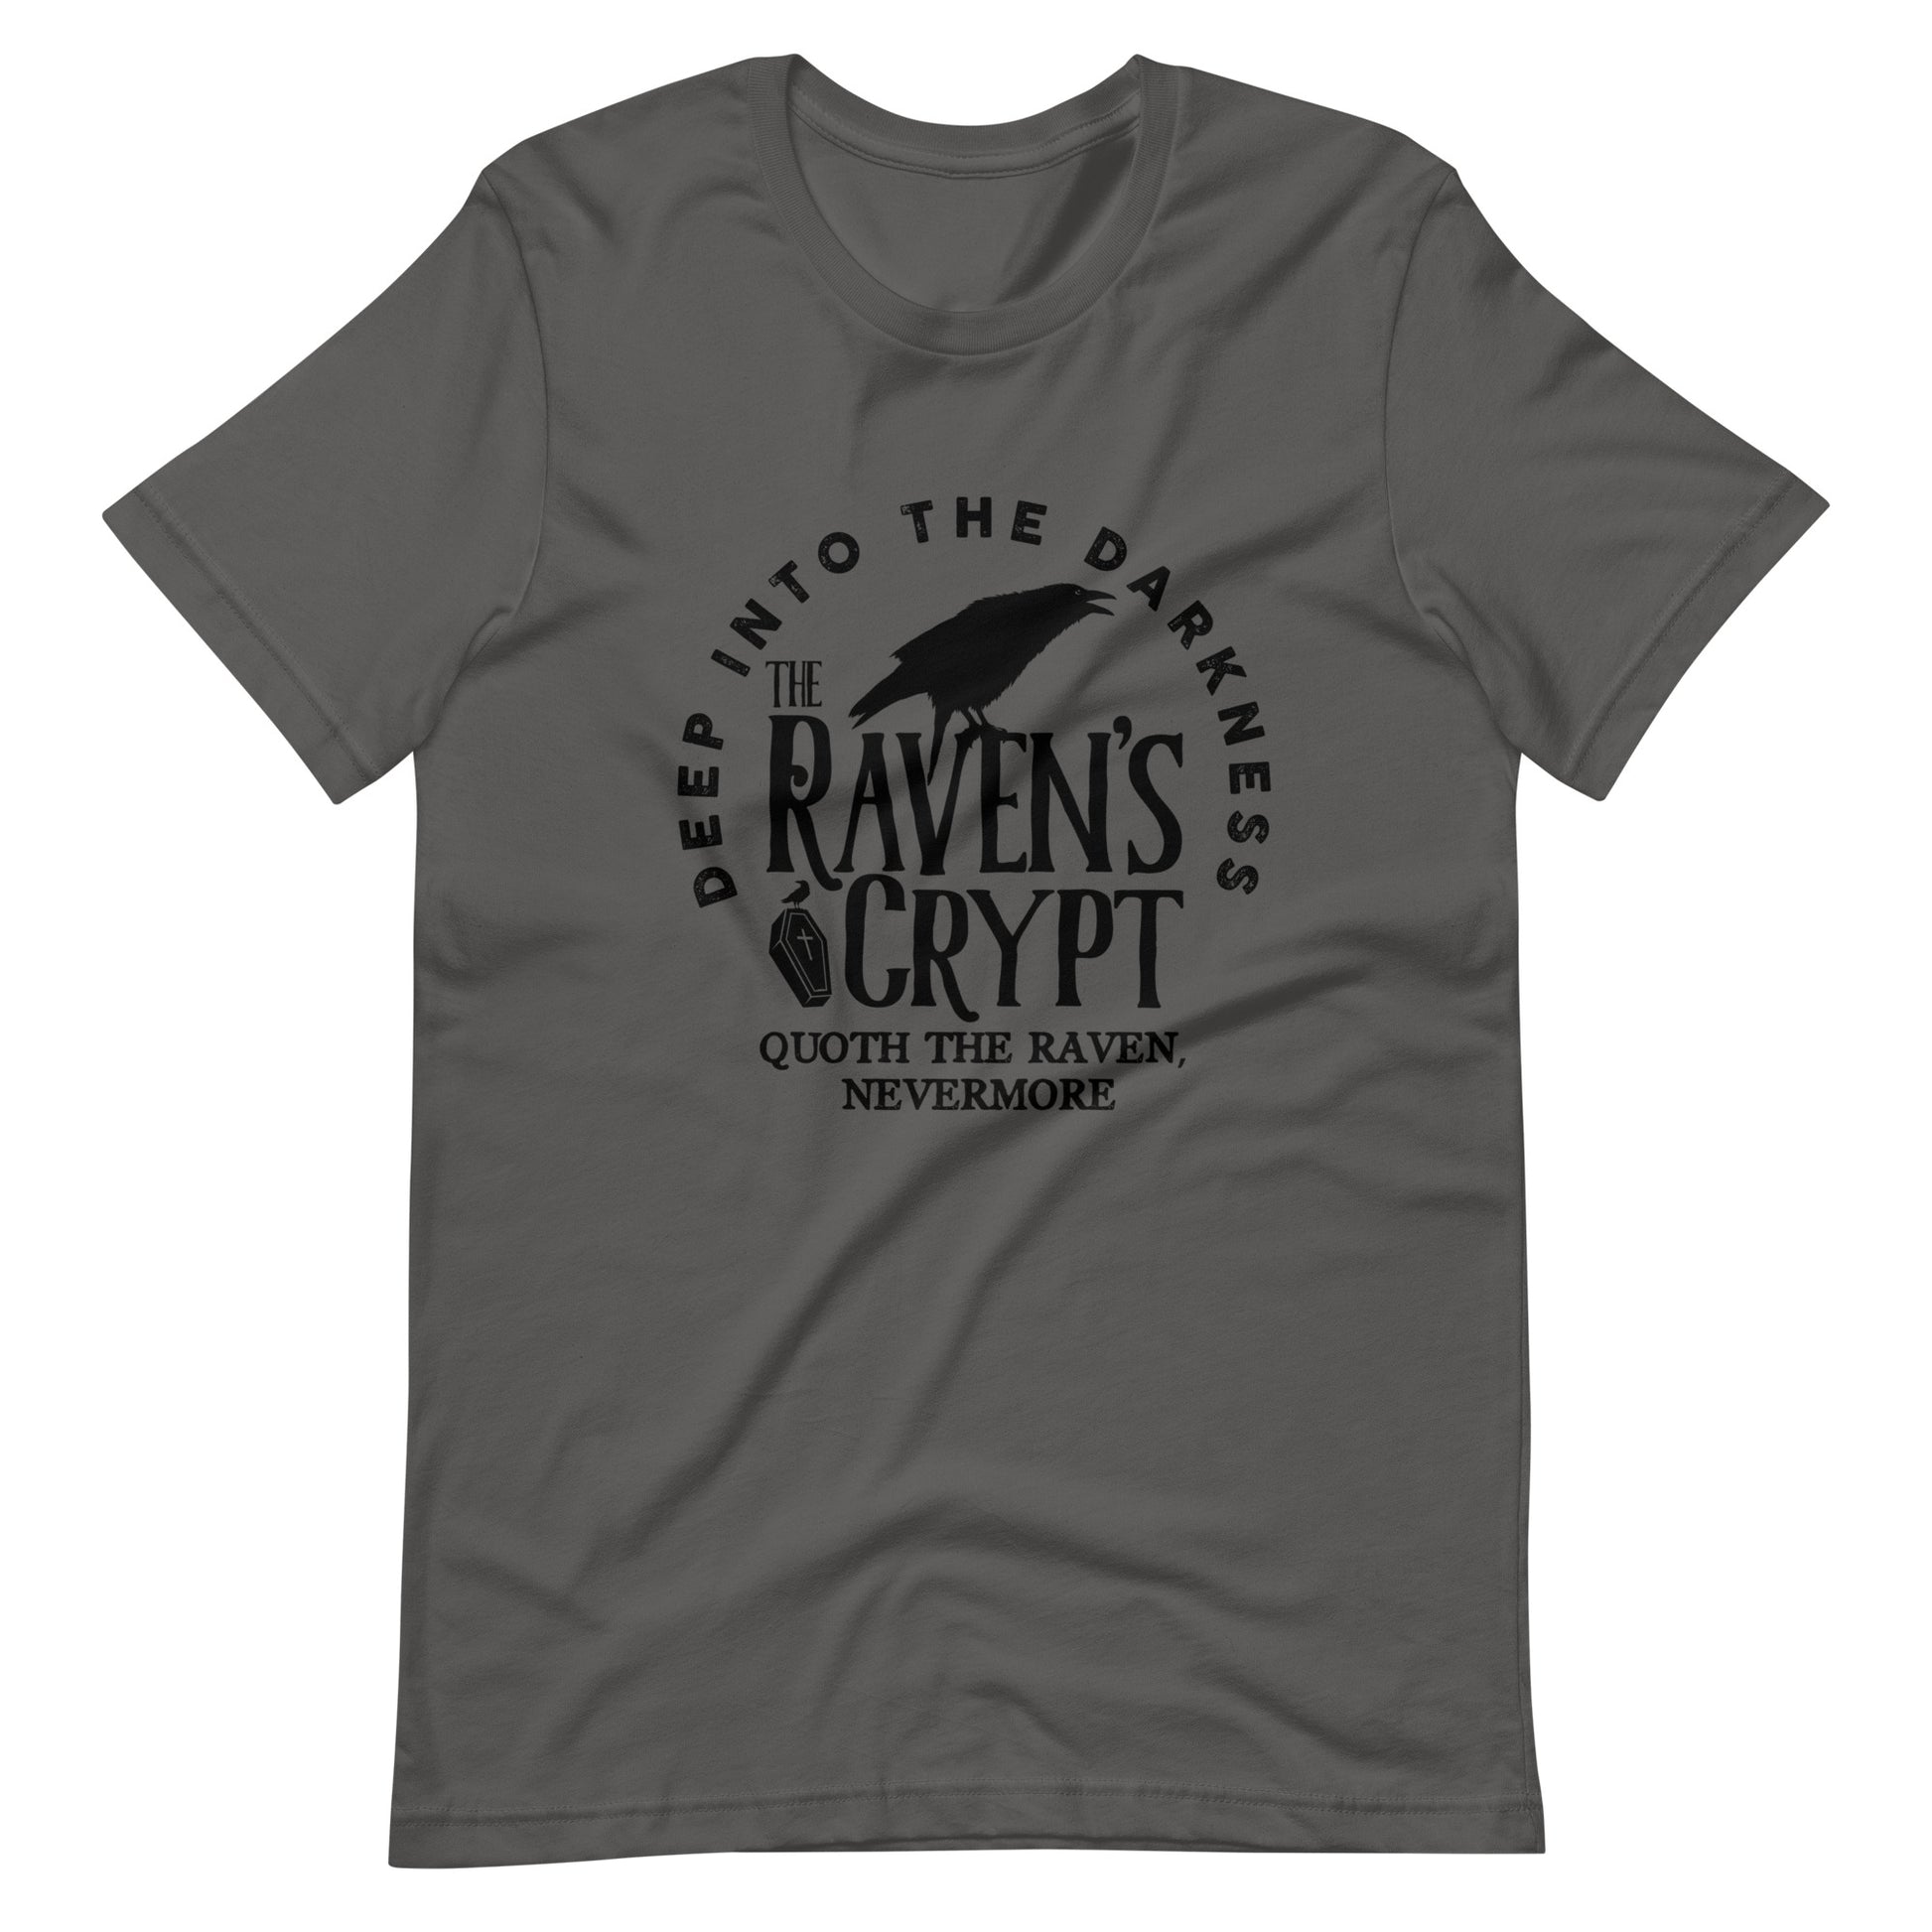 Deep Into the Darkness The Raven's Crypt - Men's t-shirt - Asphalt Front